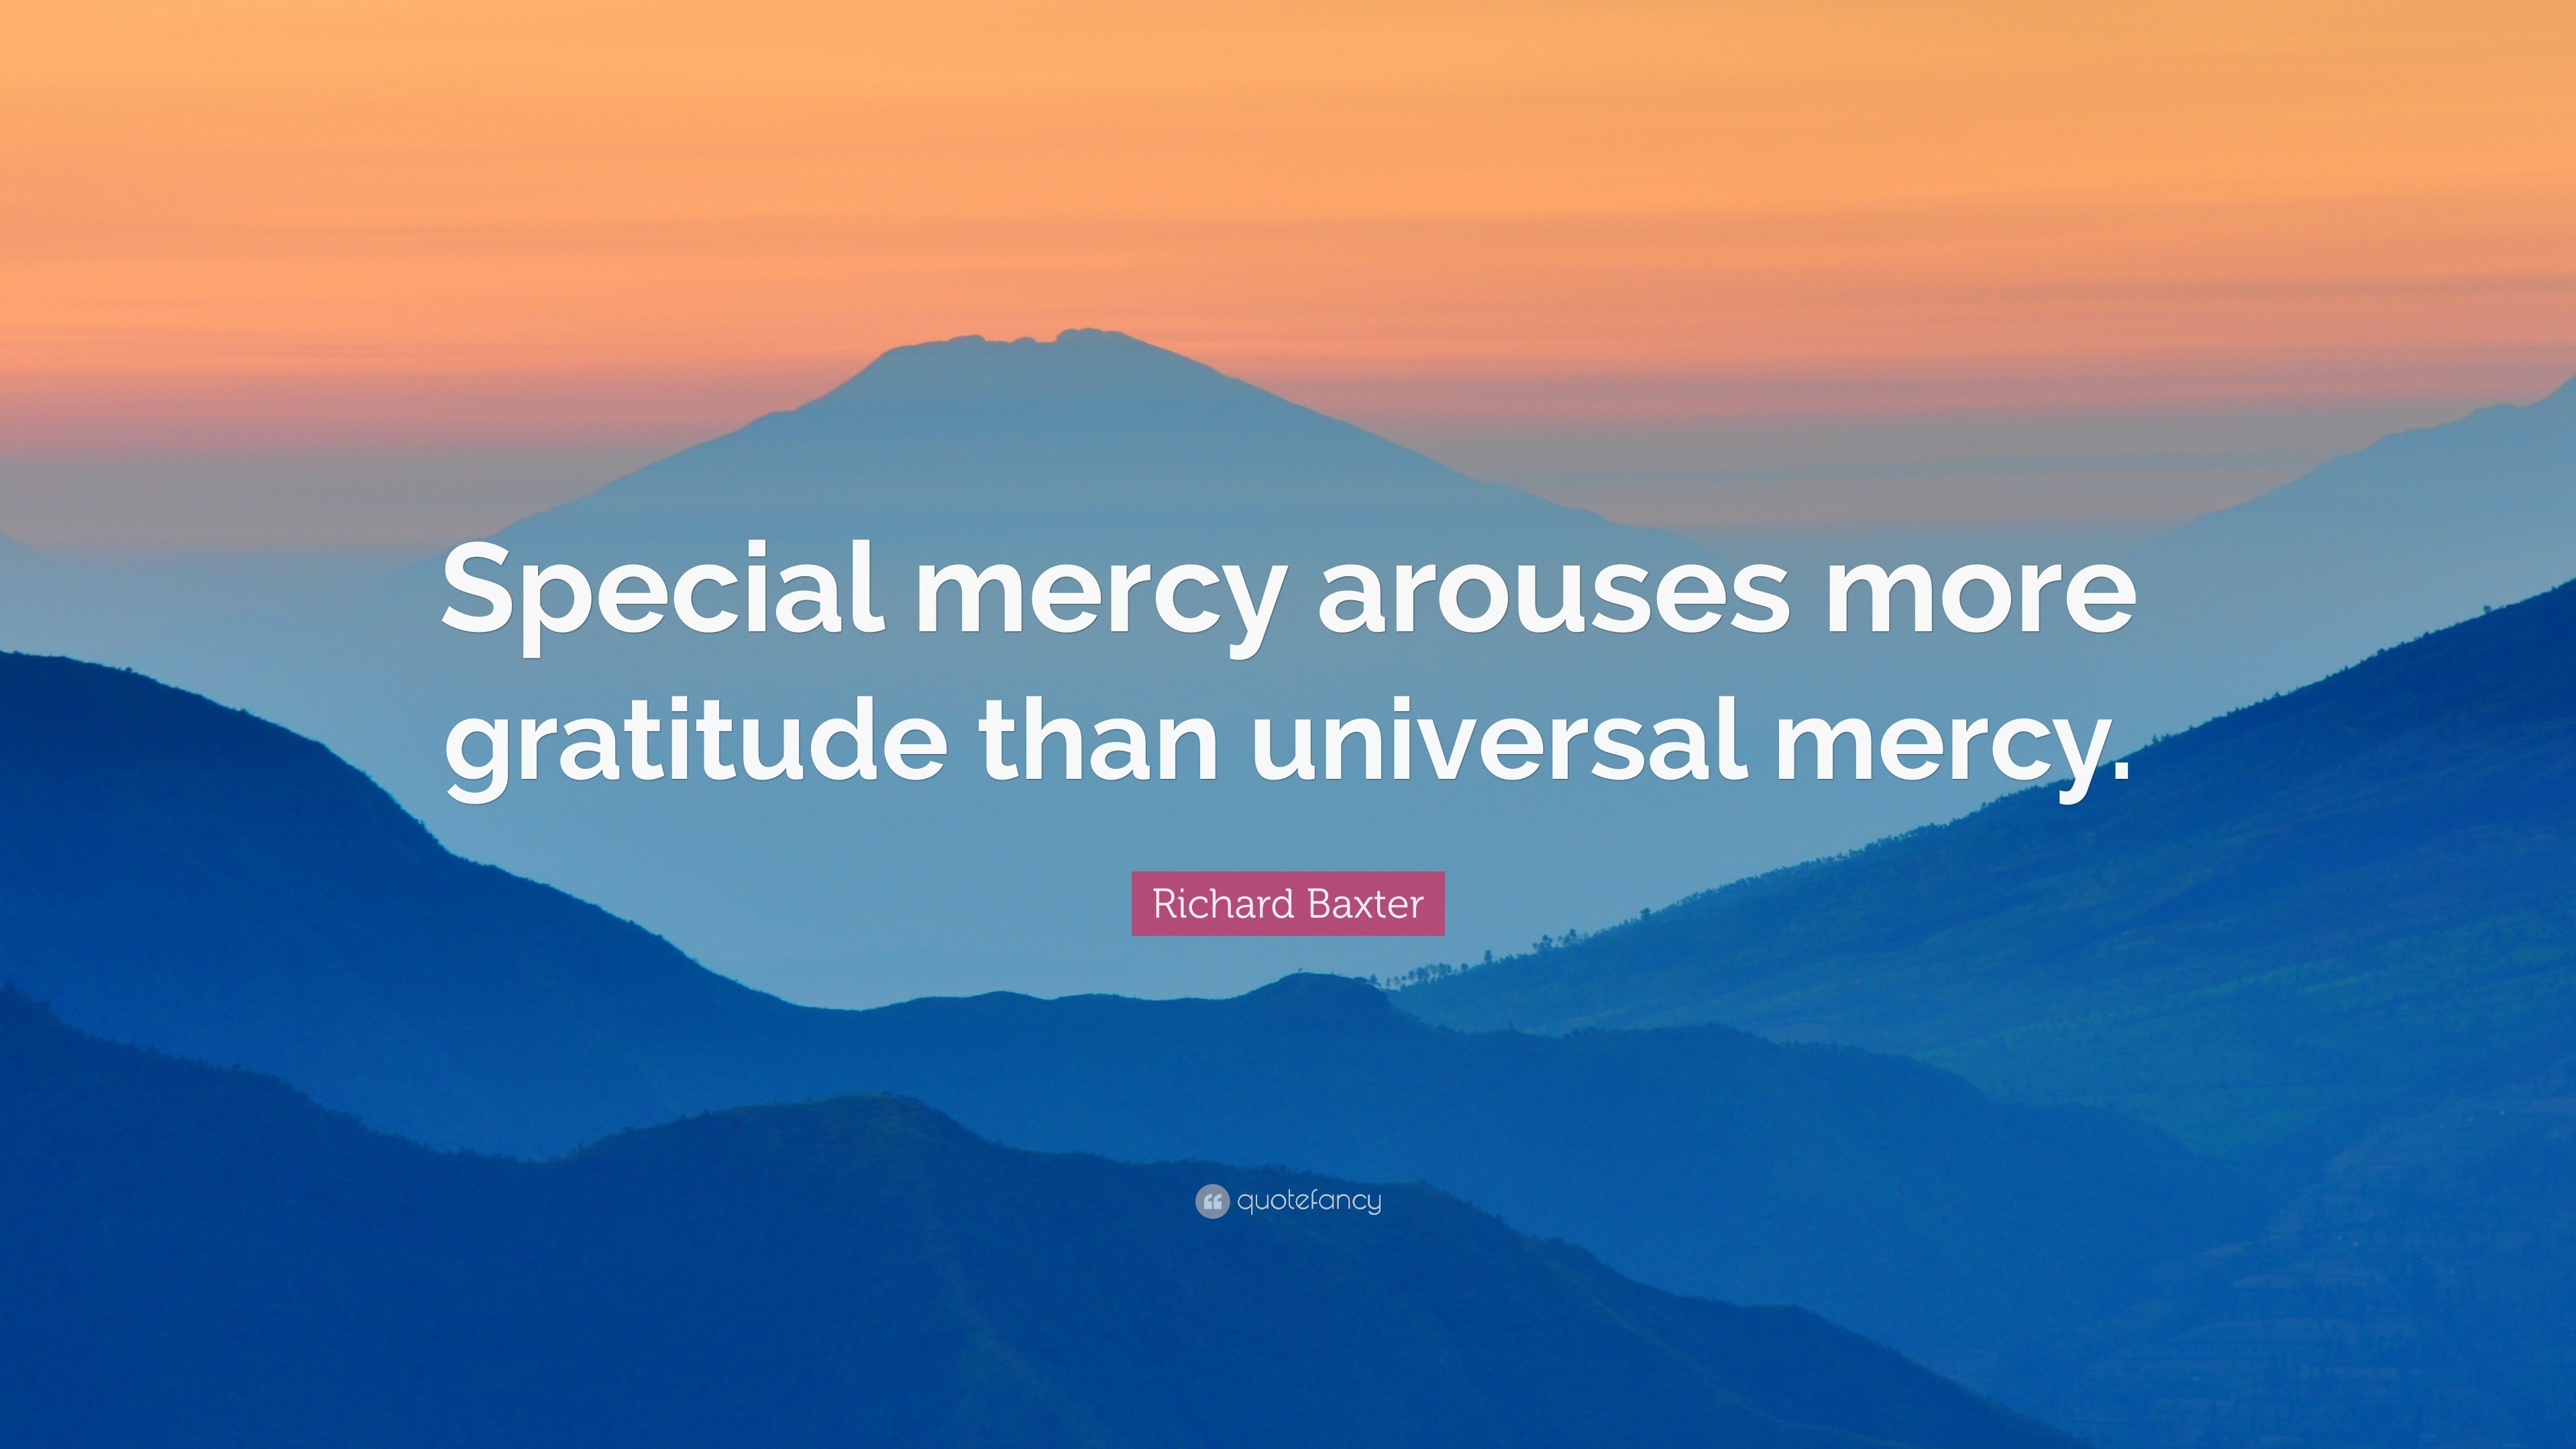 Richard Baxter Quote “Special mercy arouses more gratitude than